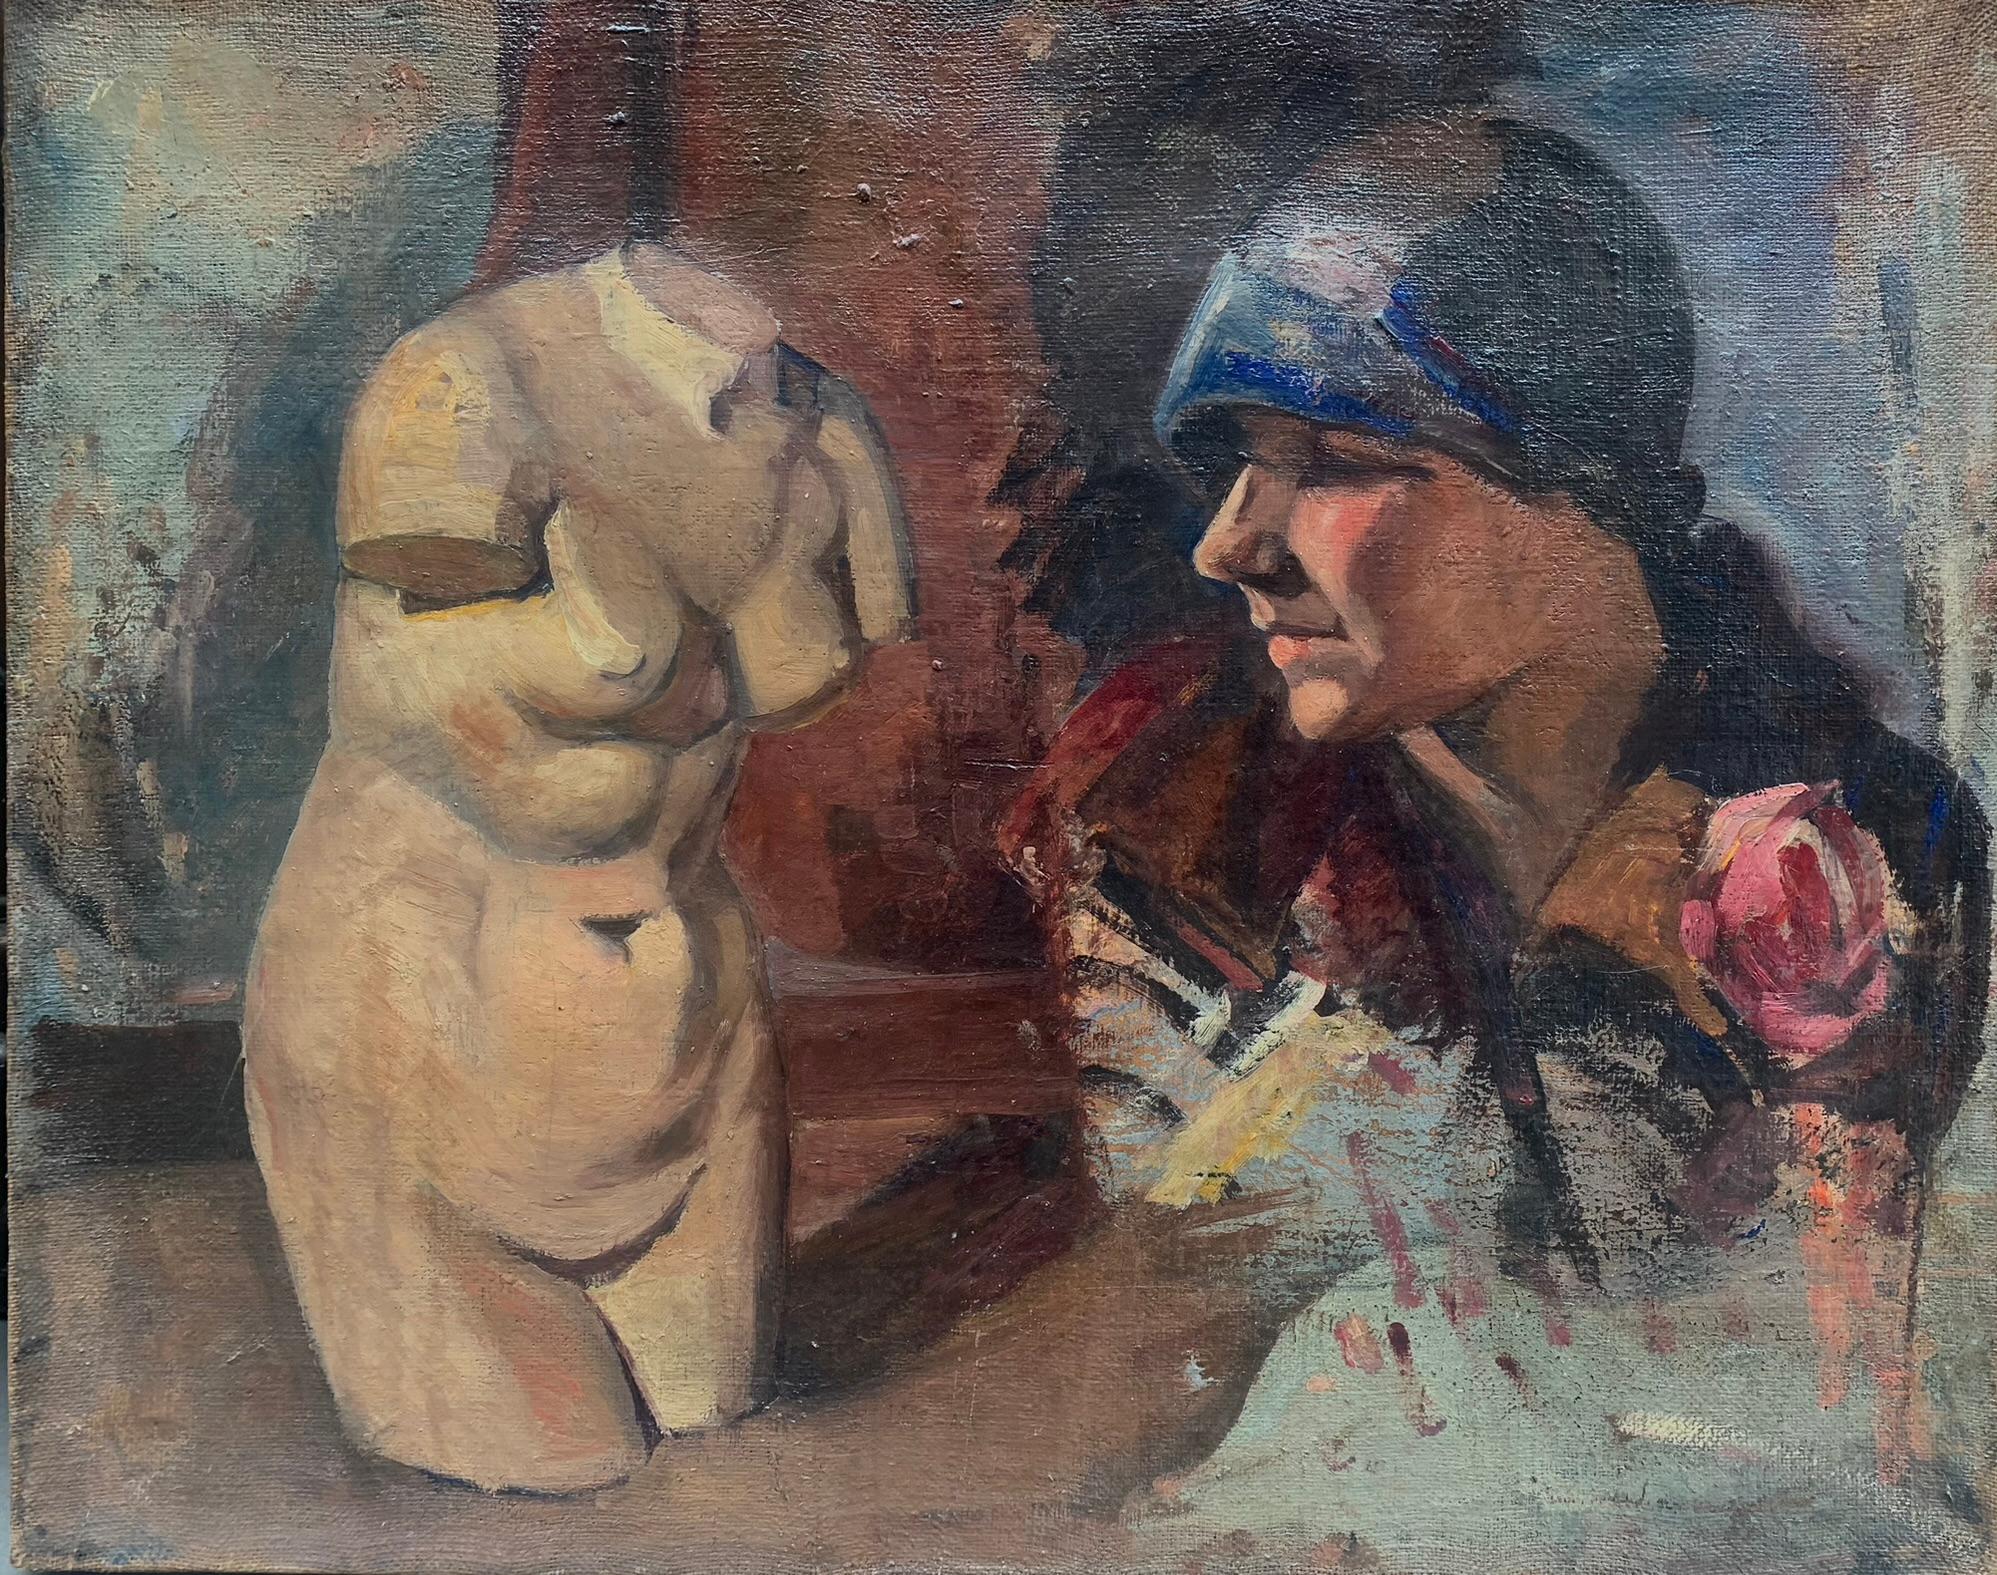 Female Torso And Portrait Of The 1920s. Double Sketch On Canvas. - Painting by Unknown